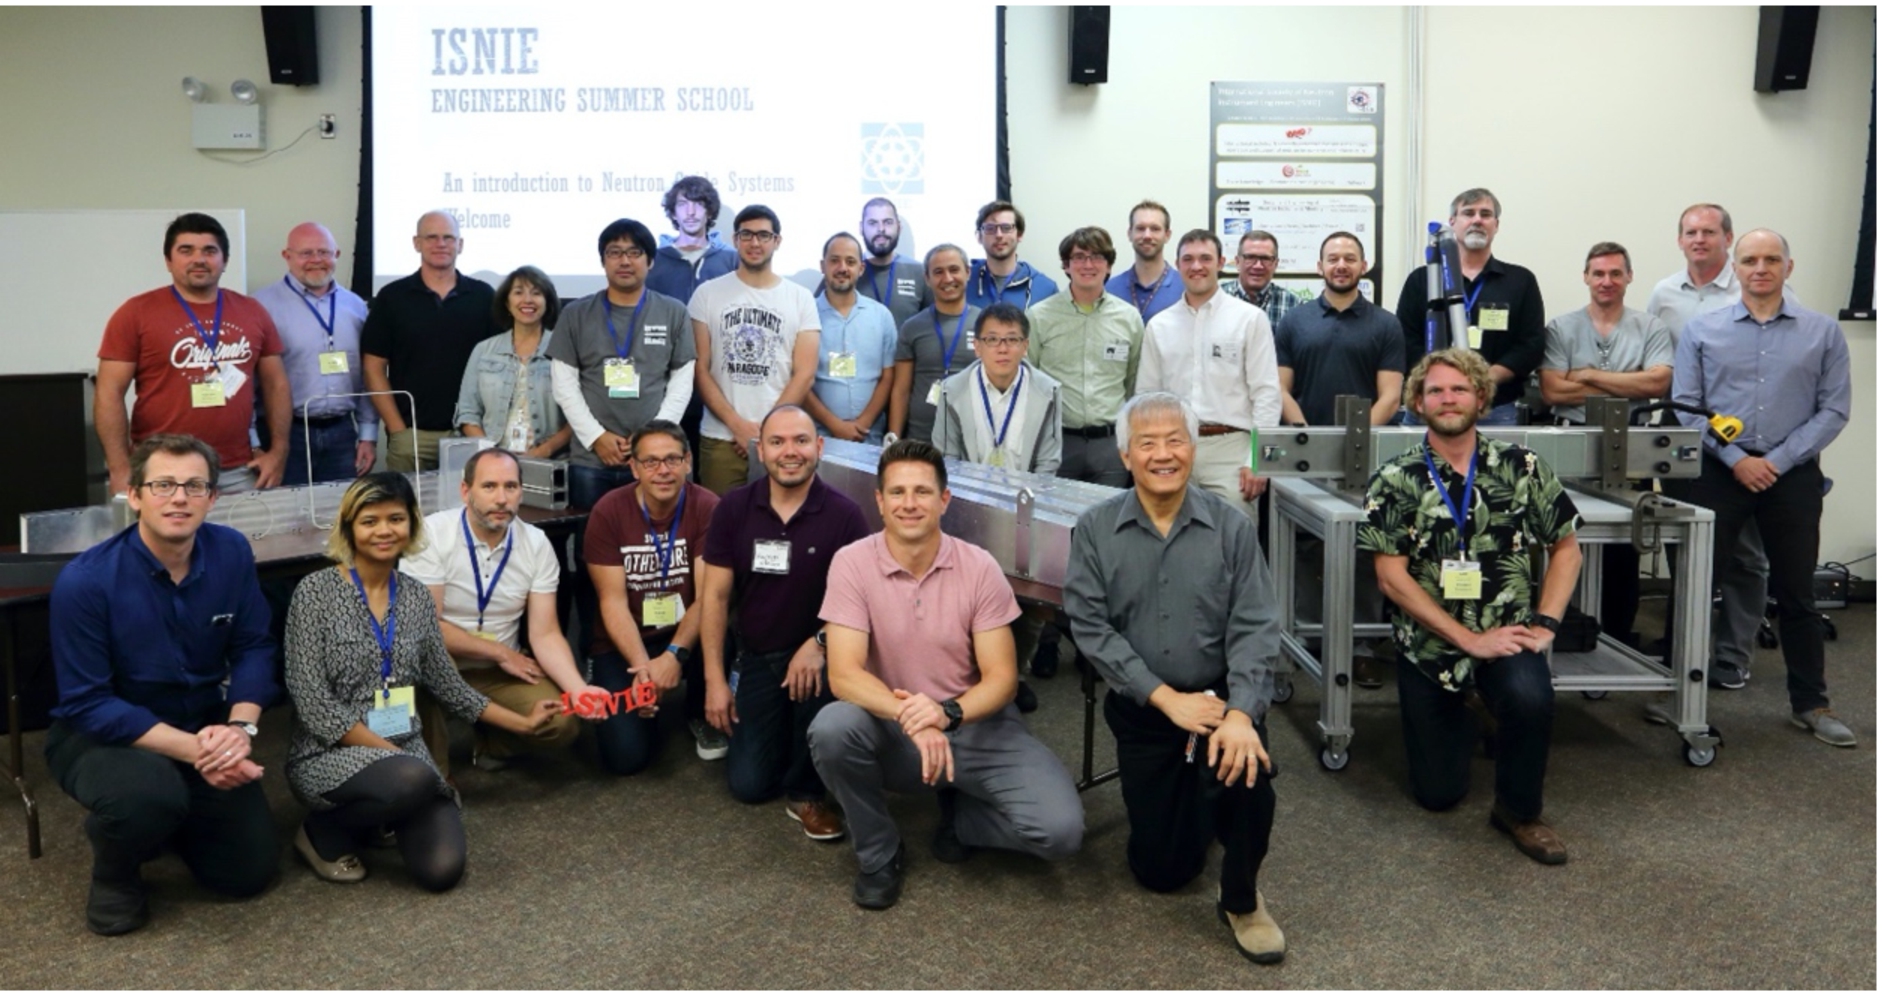 Second annual ISNIE Summer School – photo by Yiming Qui (NCNR).